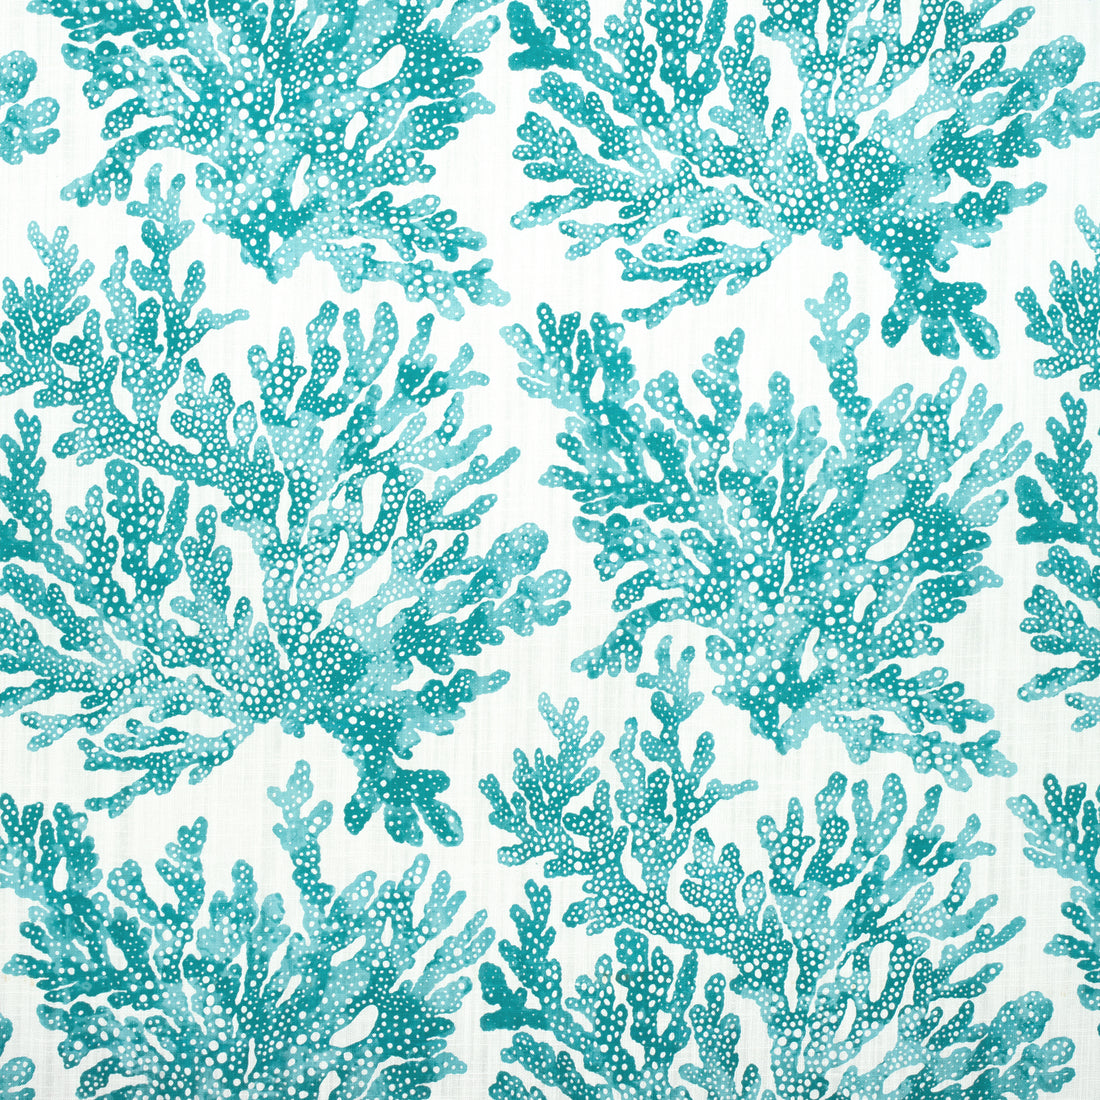 Marine Coral fabric in turquoise color - pattern number F910121 - by Thibaut in the Tropics collection